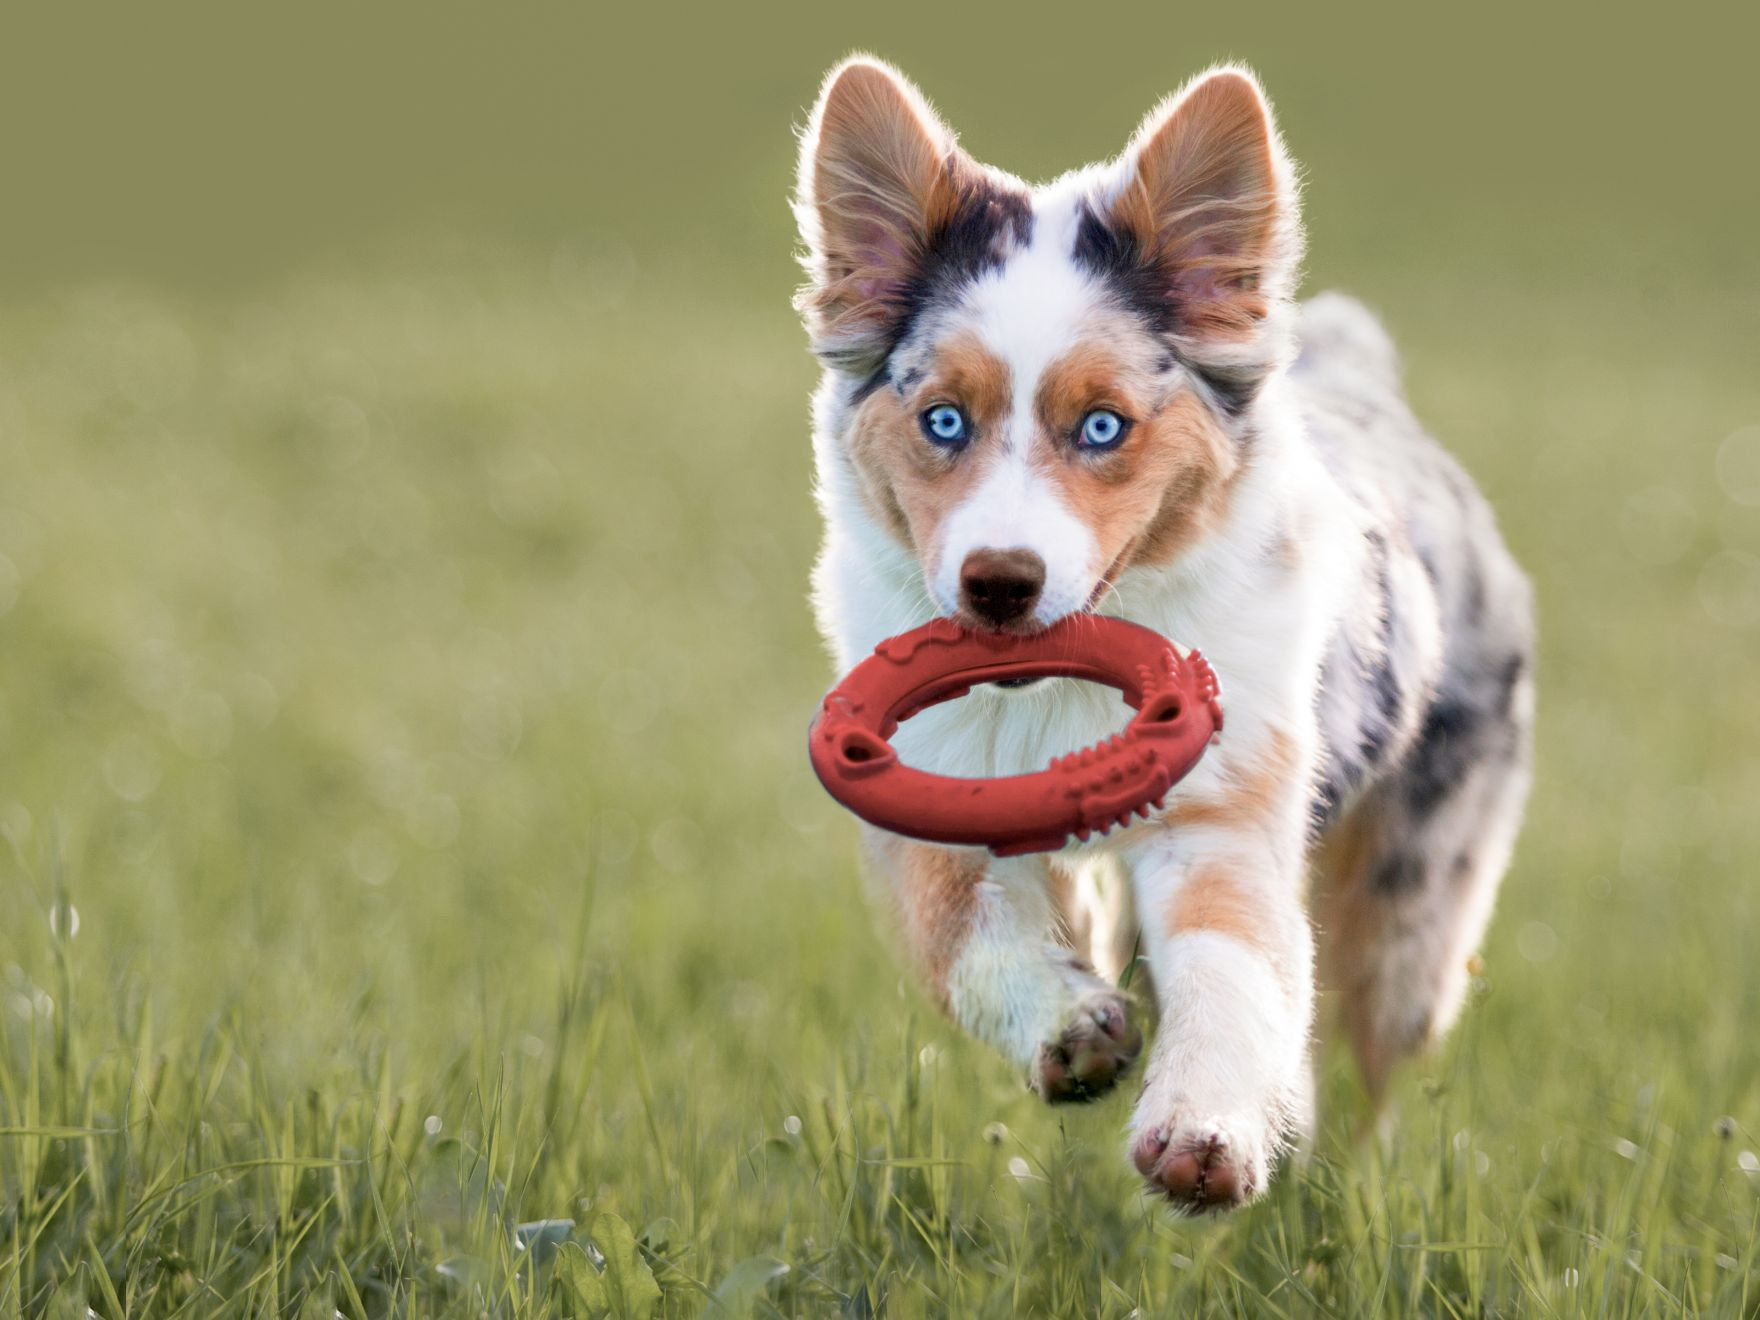 Australian Shepherd puppy playing in the grass with a toy